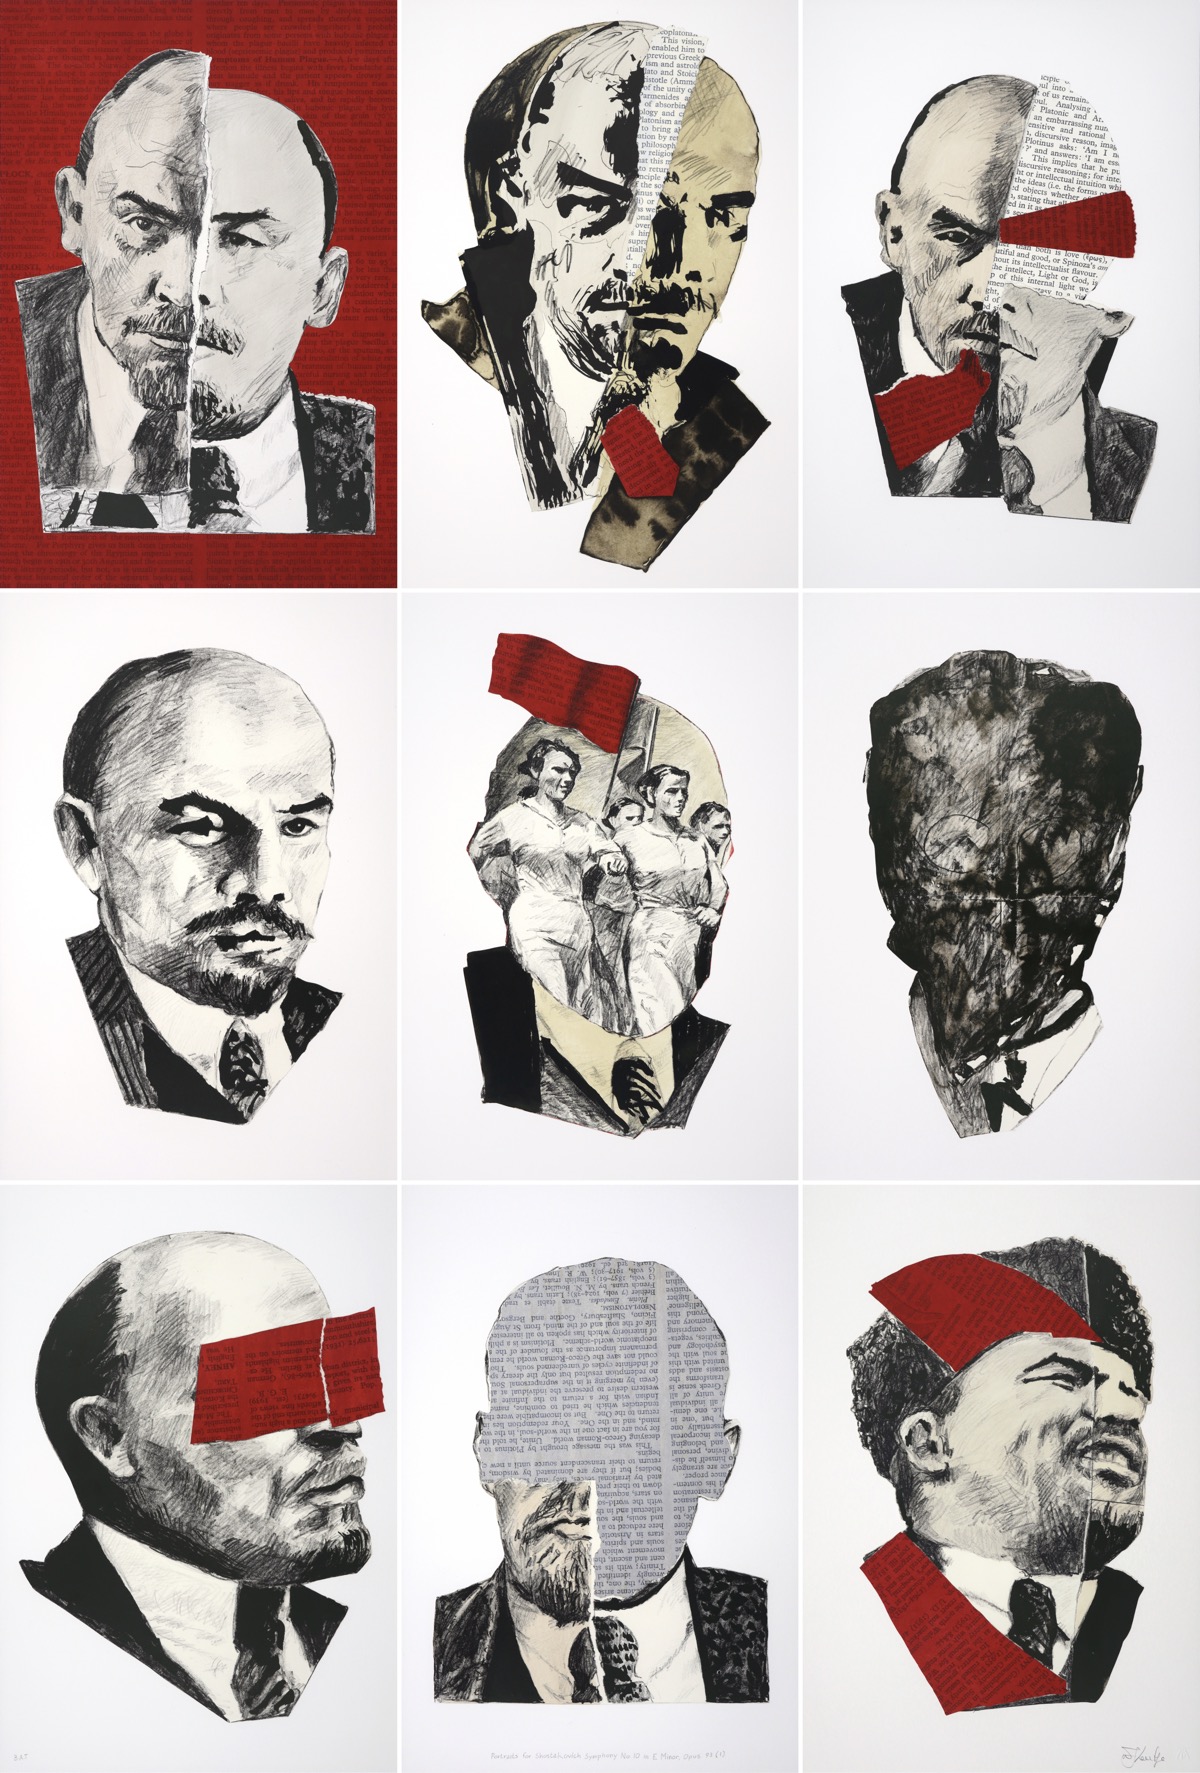 Map-fold artwork by William Kentridge featuring nine portraits of Lenin in muted greys and black with red elements